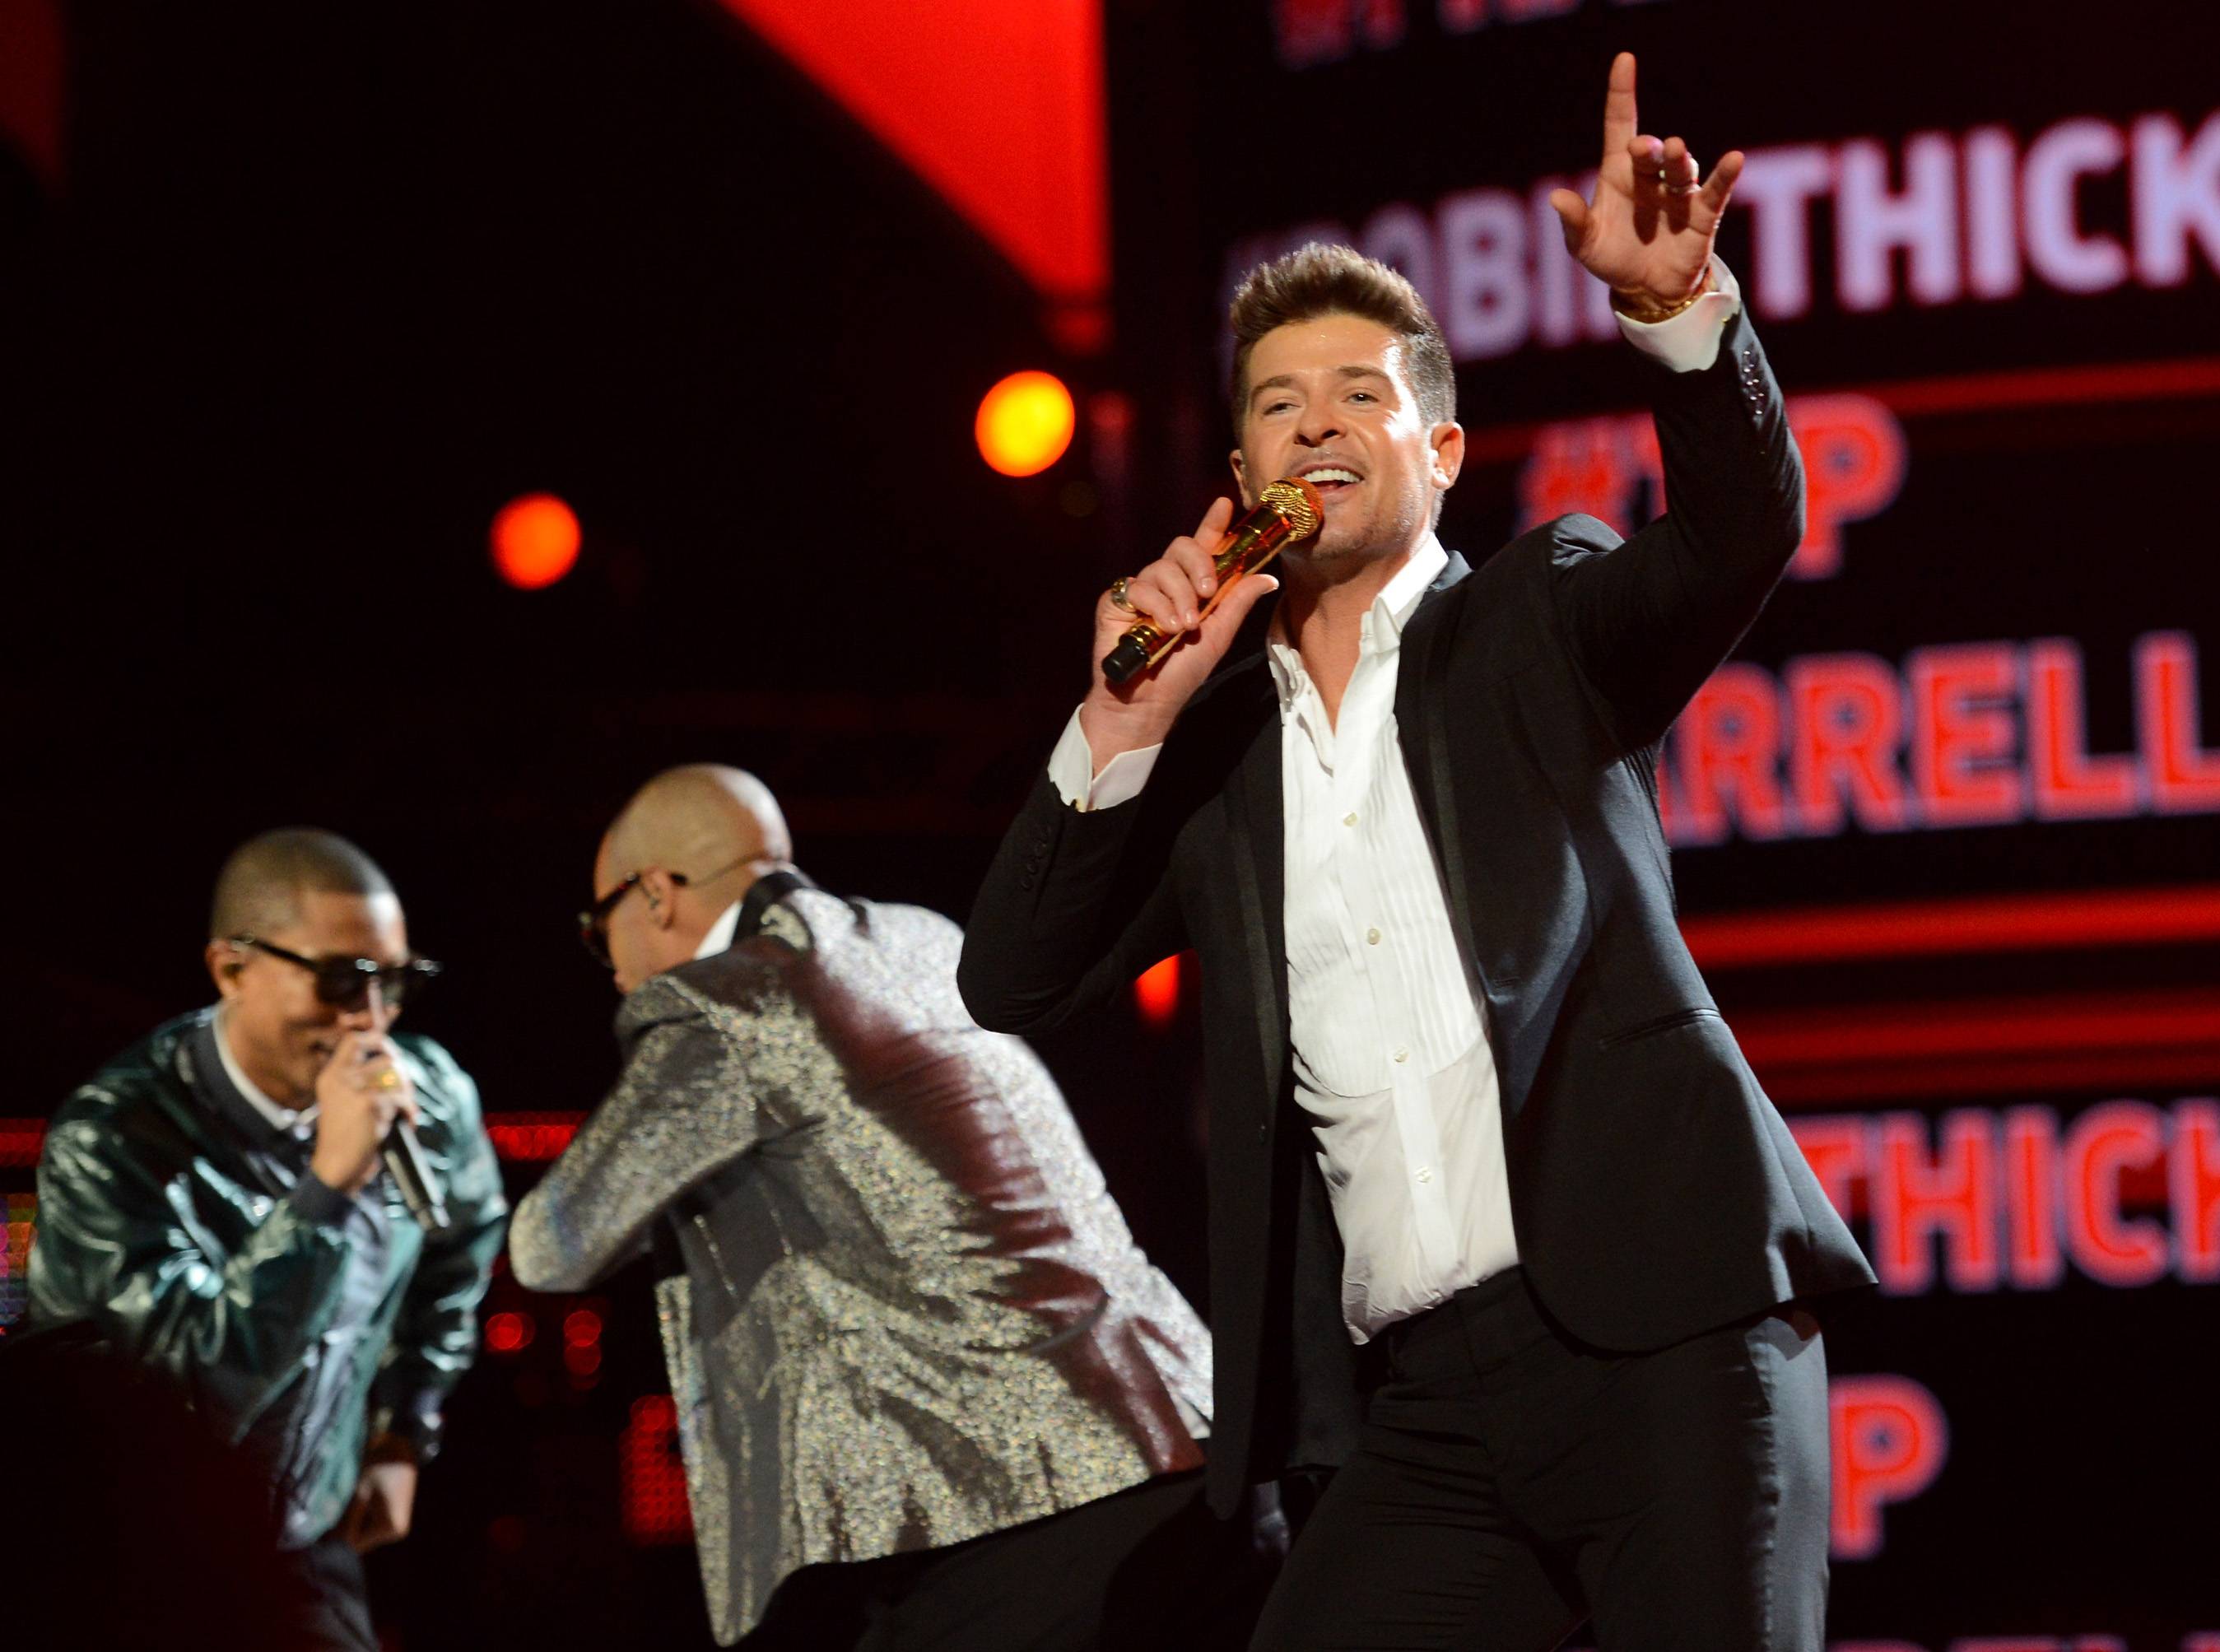 BET Awards 2013 Performance, Robin Thicke Performs "Blurred Lines"